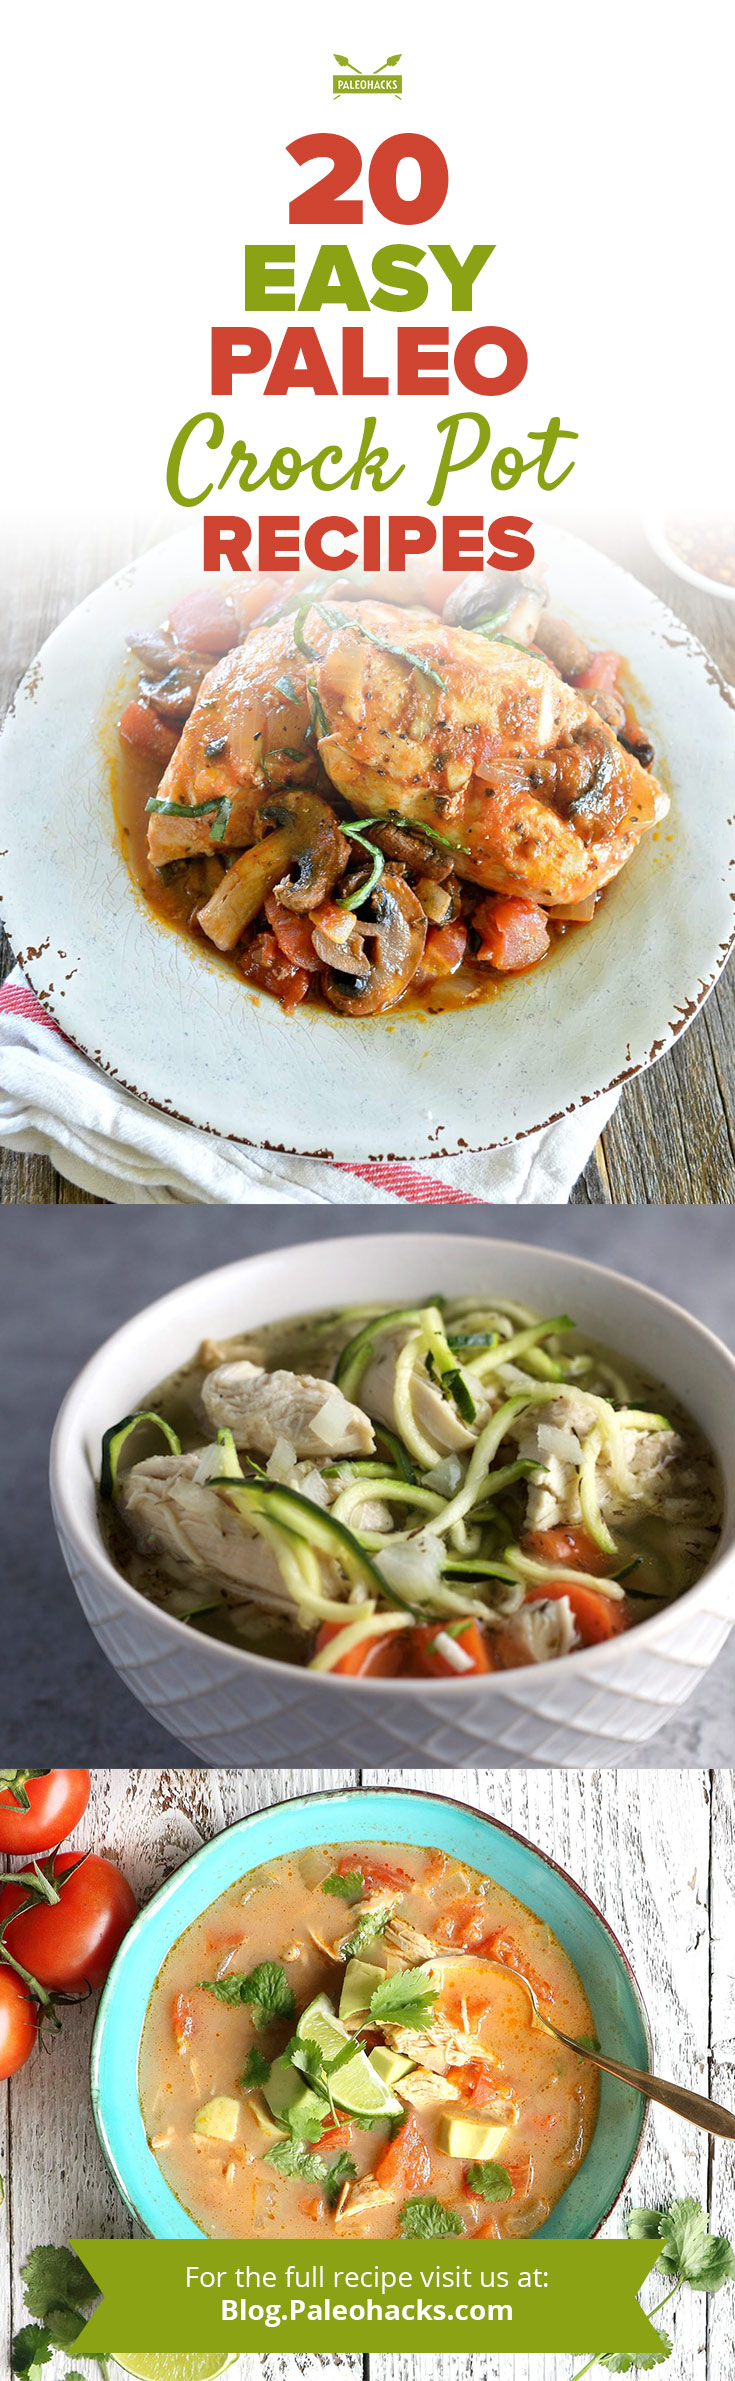 There's nothing better than coming home from a long day at work to a hot meal with minimal effort. Here are 20 Paleo Crock Pot recipes for you to enjoy.